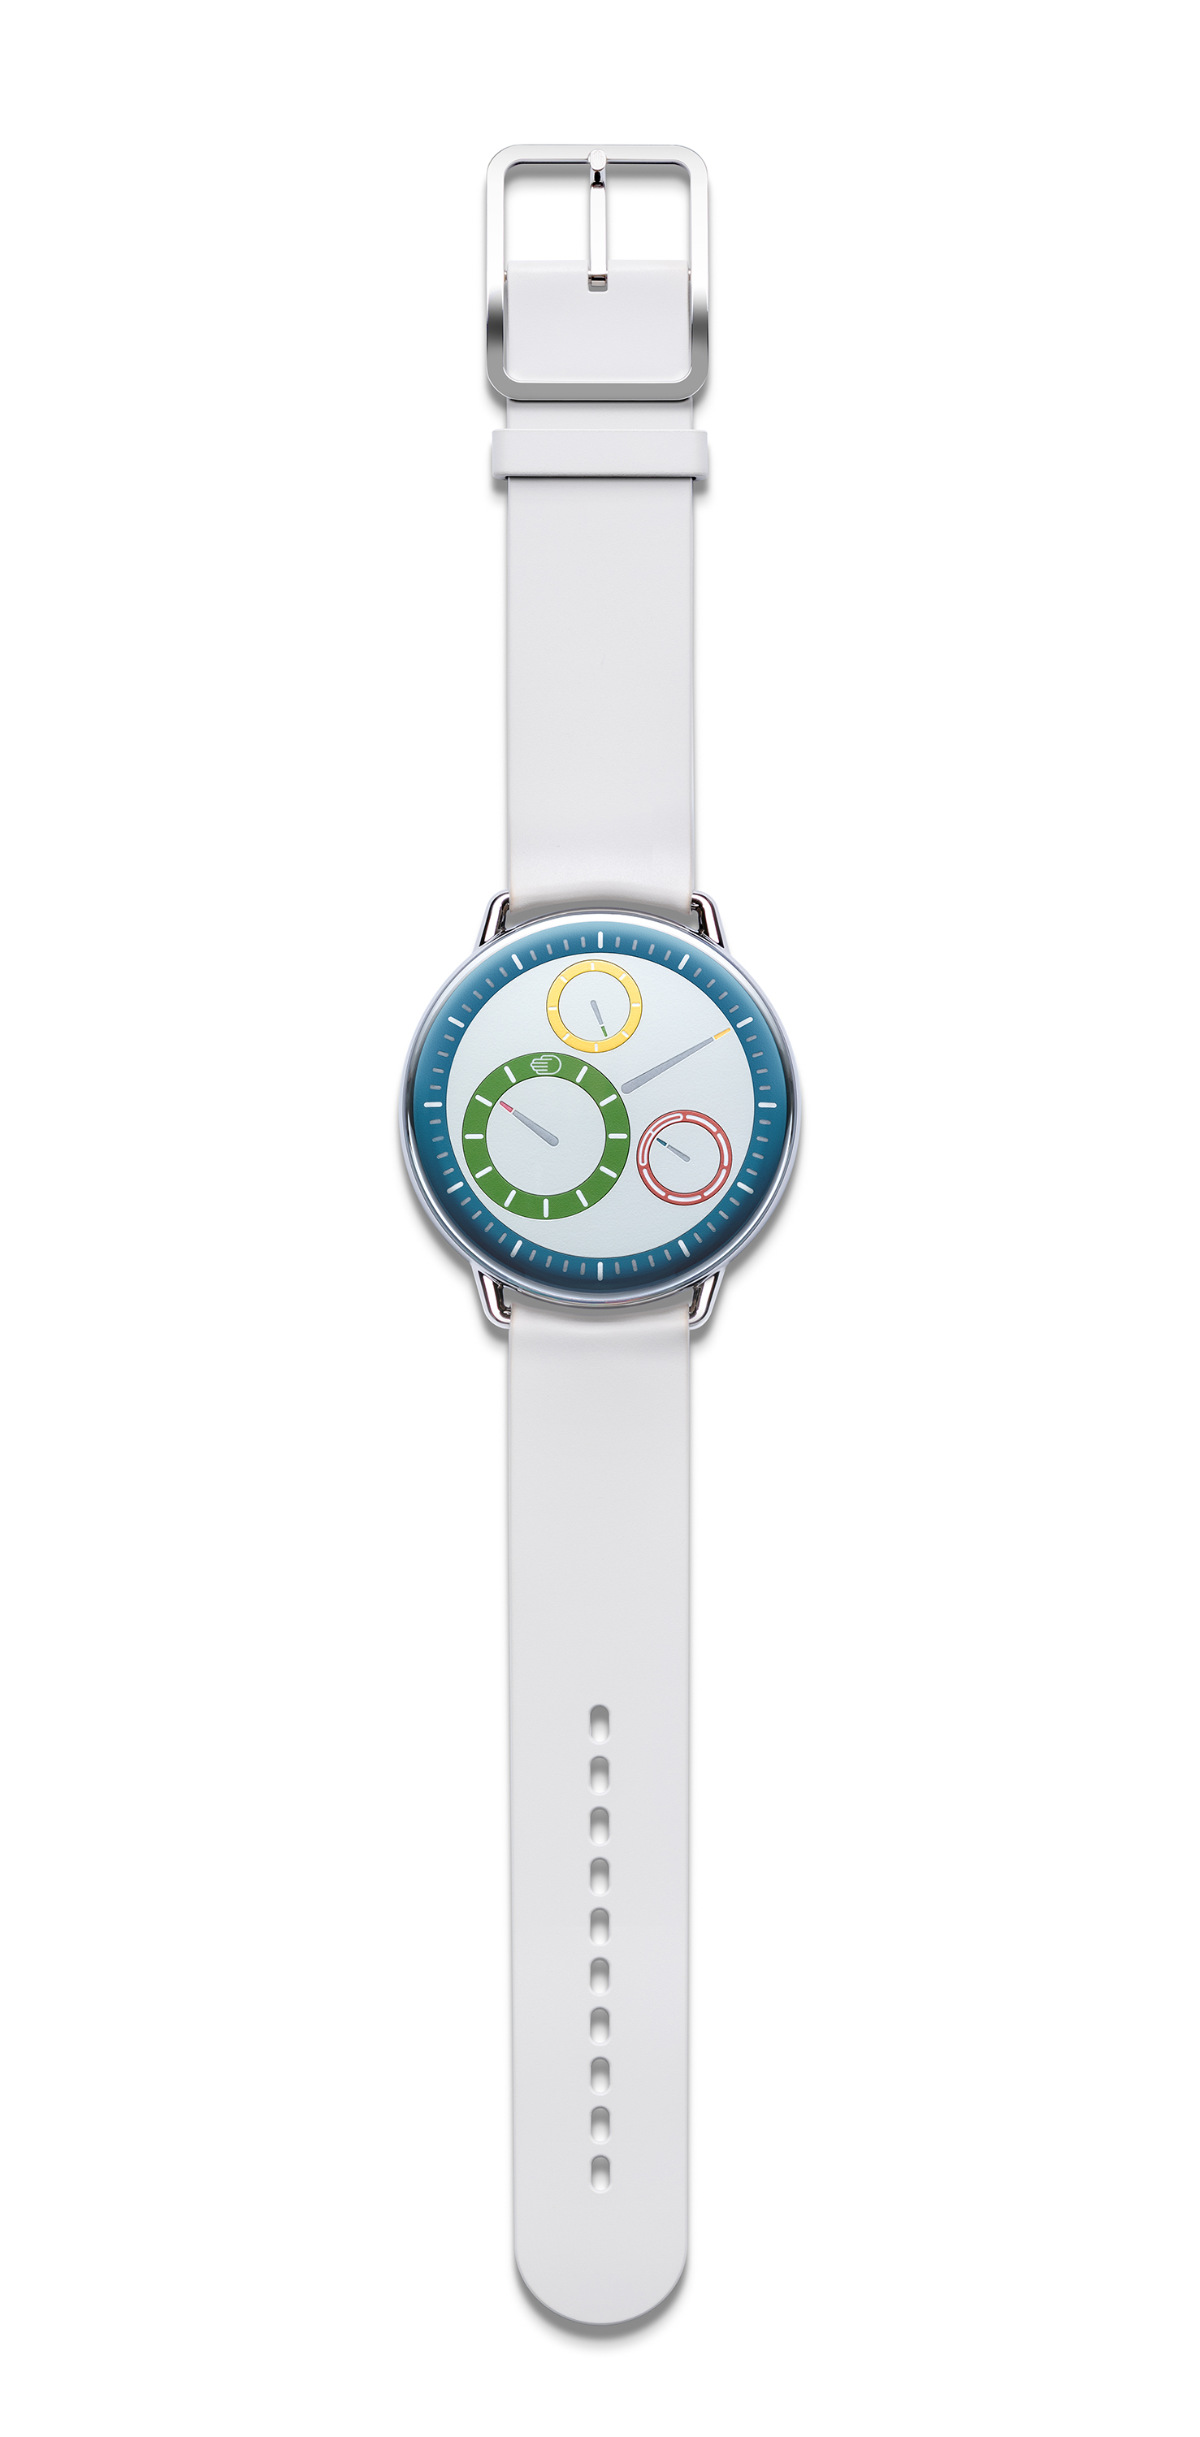 The New Ressence TYPE 1° M For The Colourful Mind